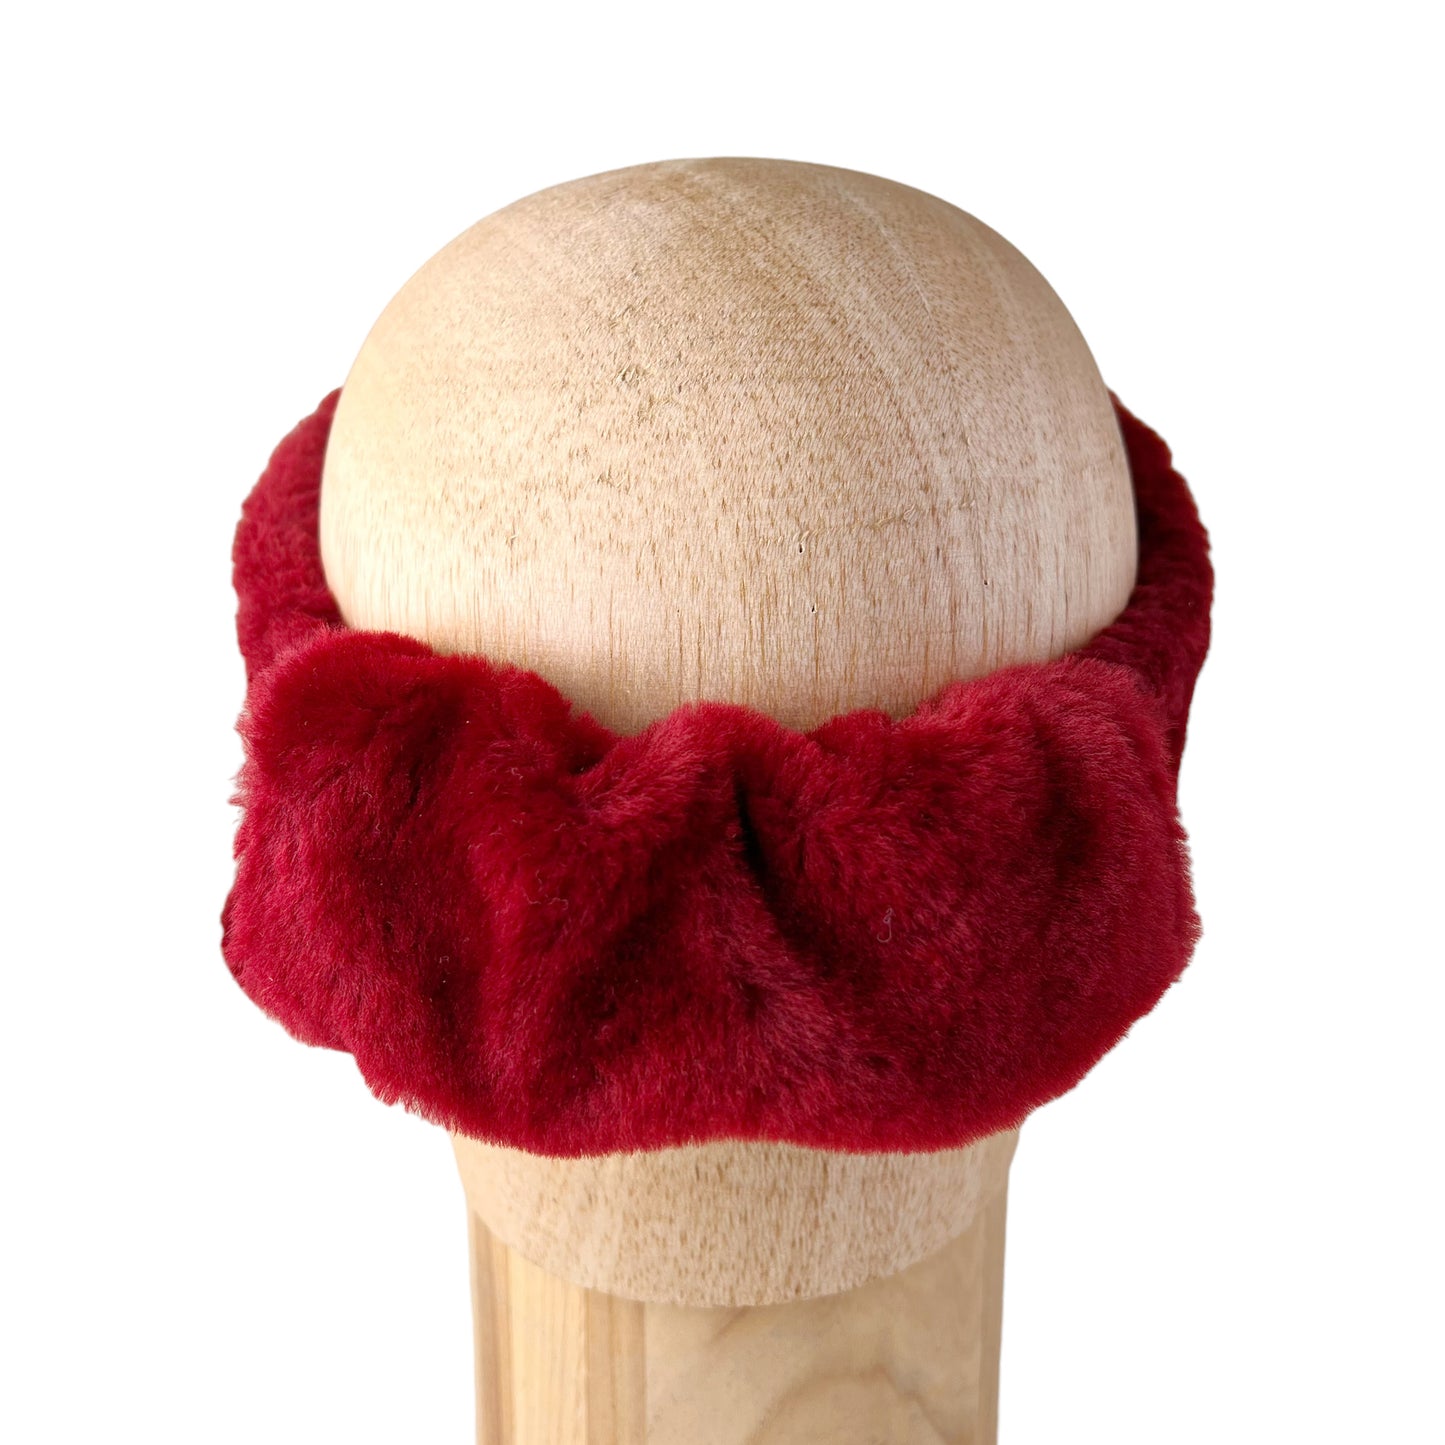 Ruby Red Alpine Ear and Head Sheep Shearling Fur Band